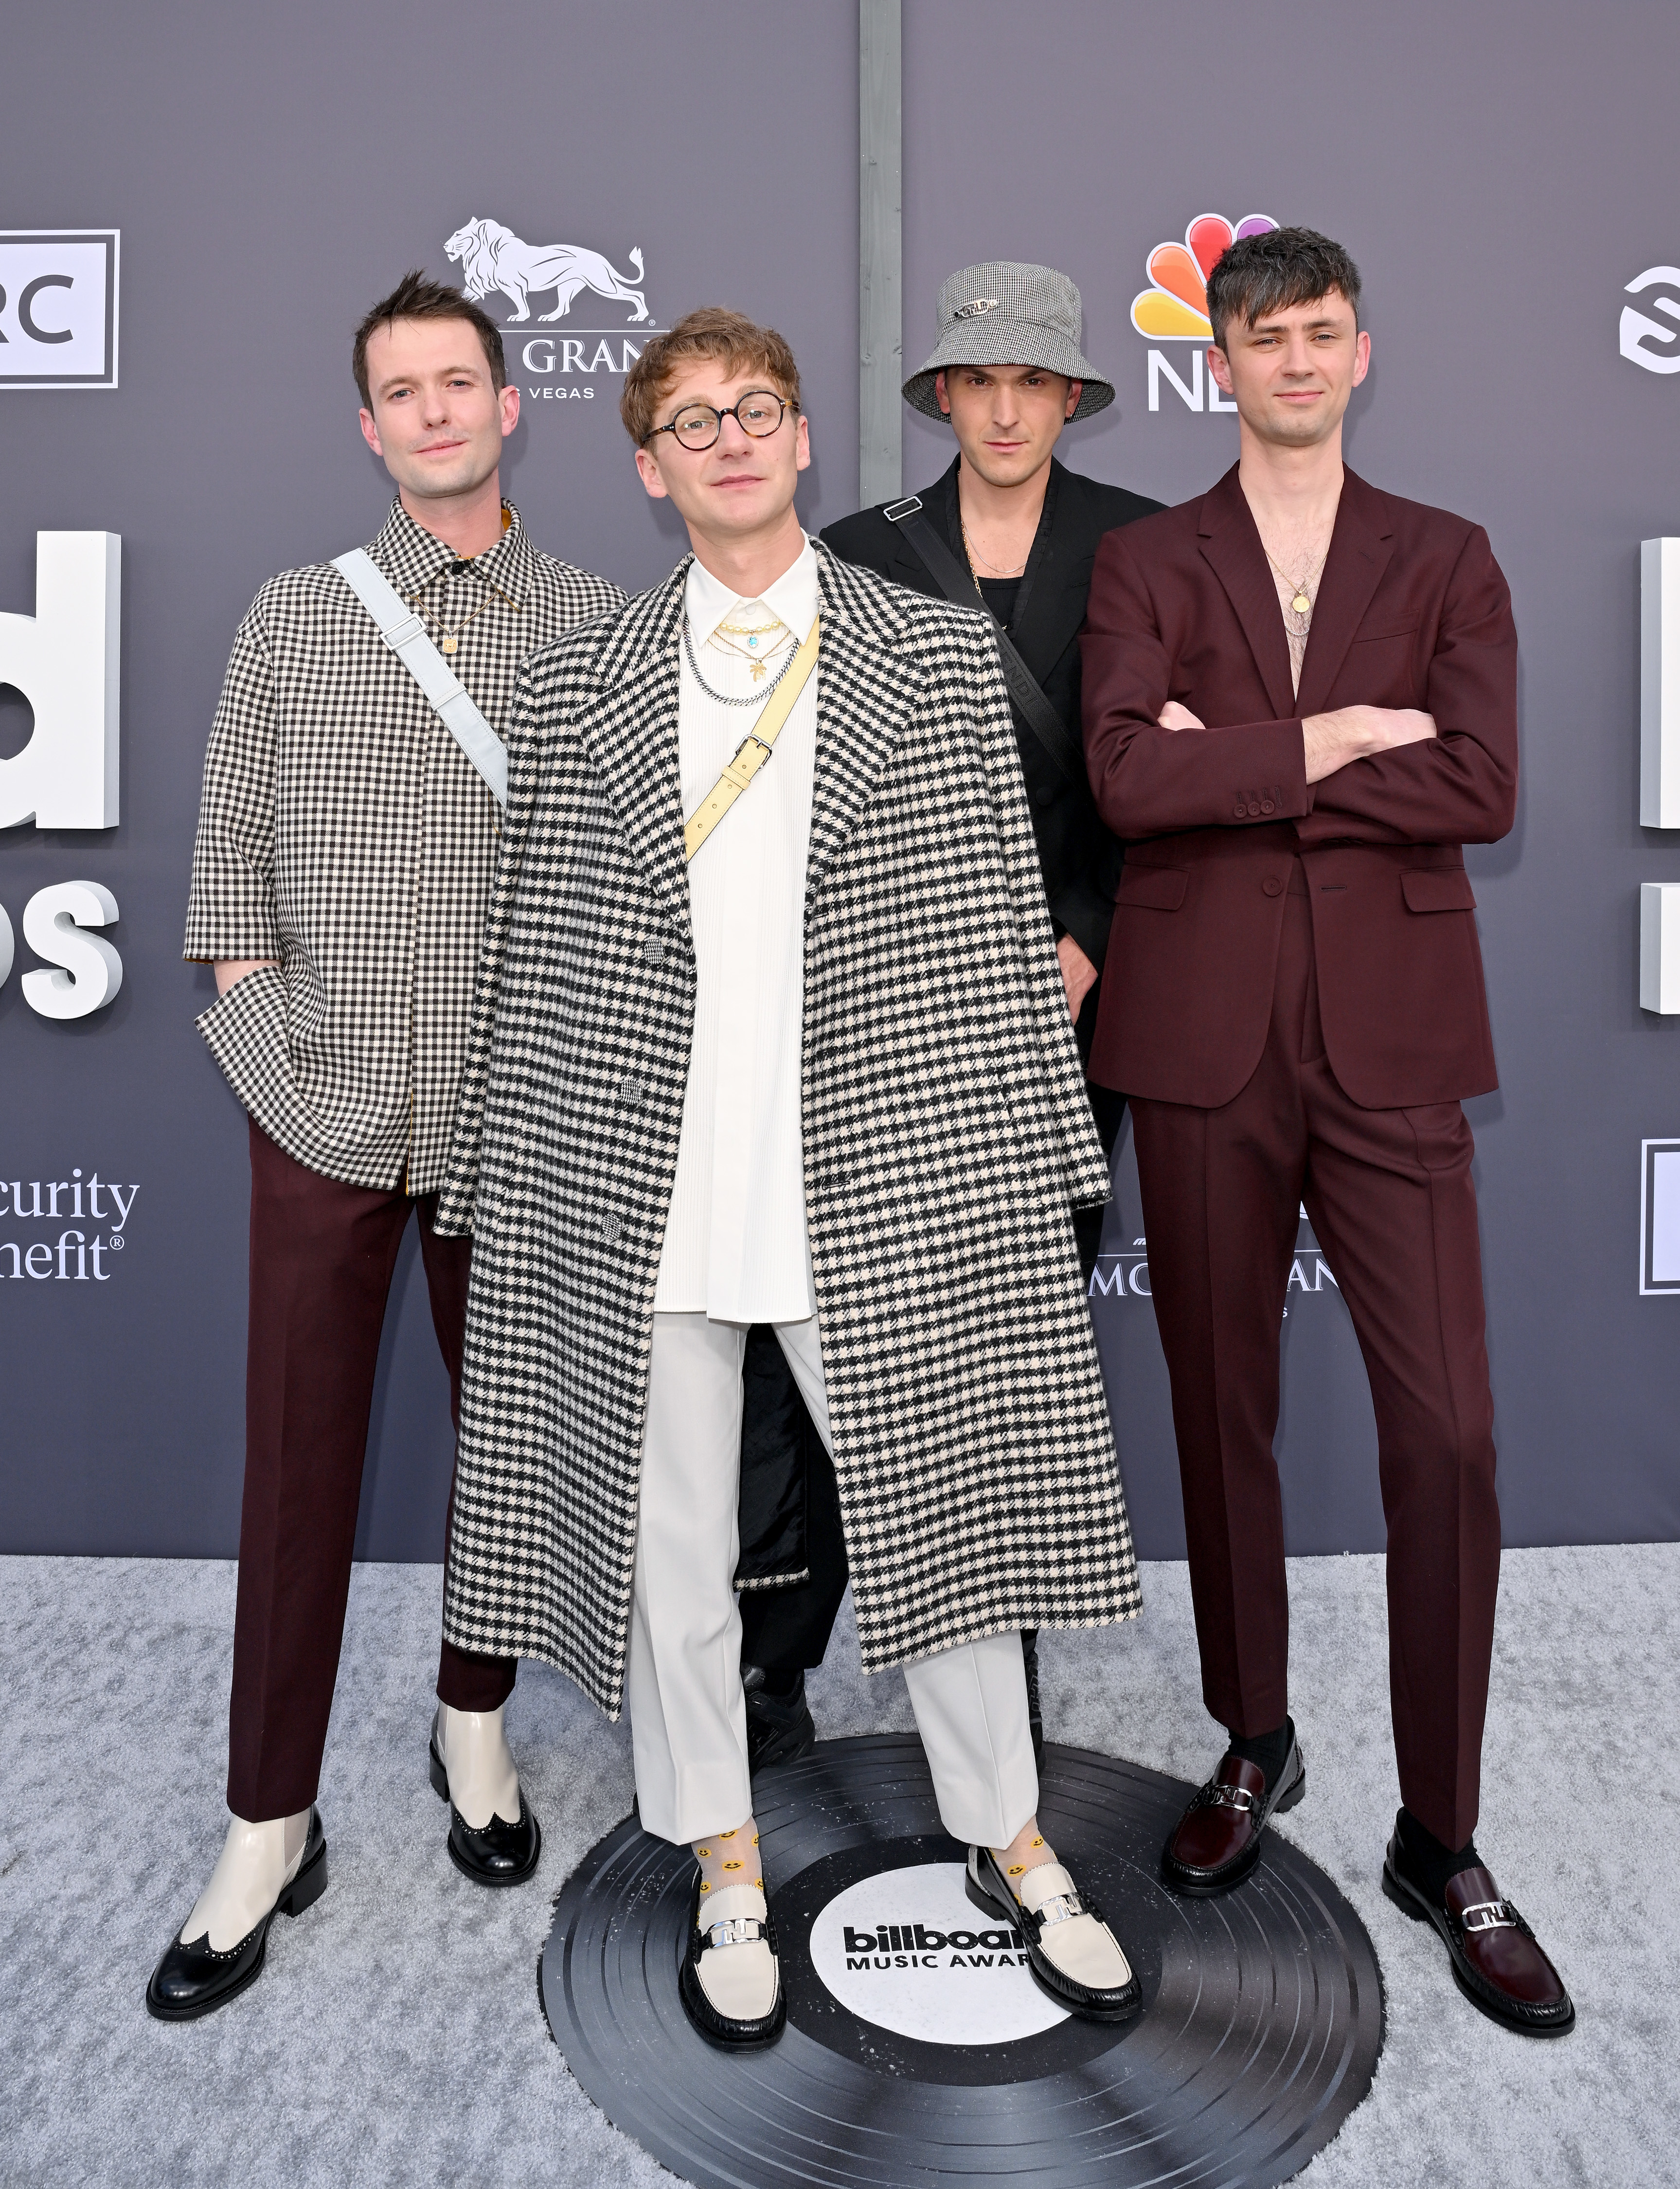 The four band members at a media event